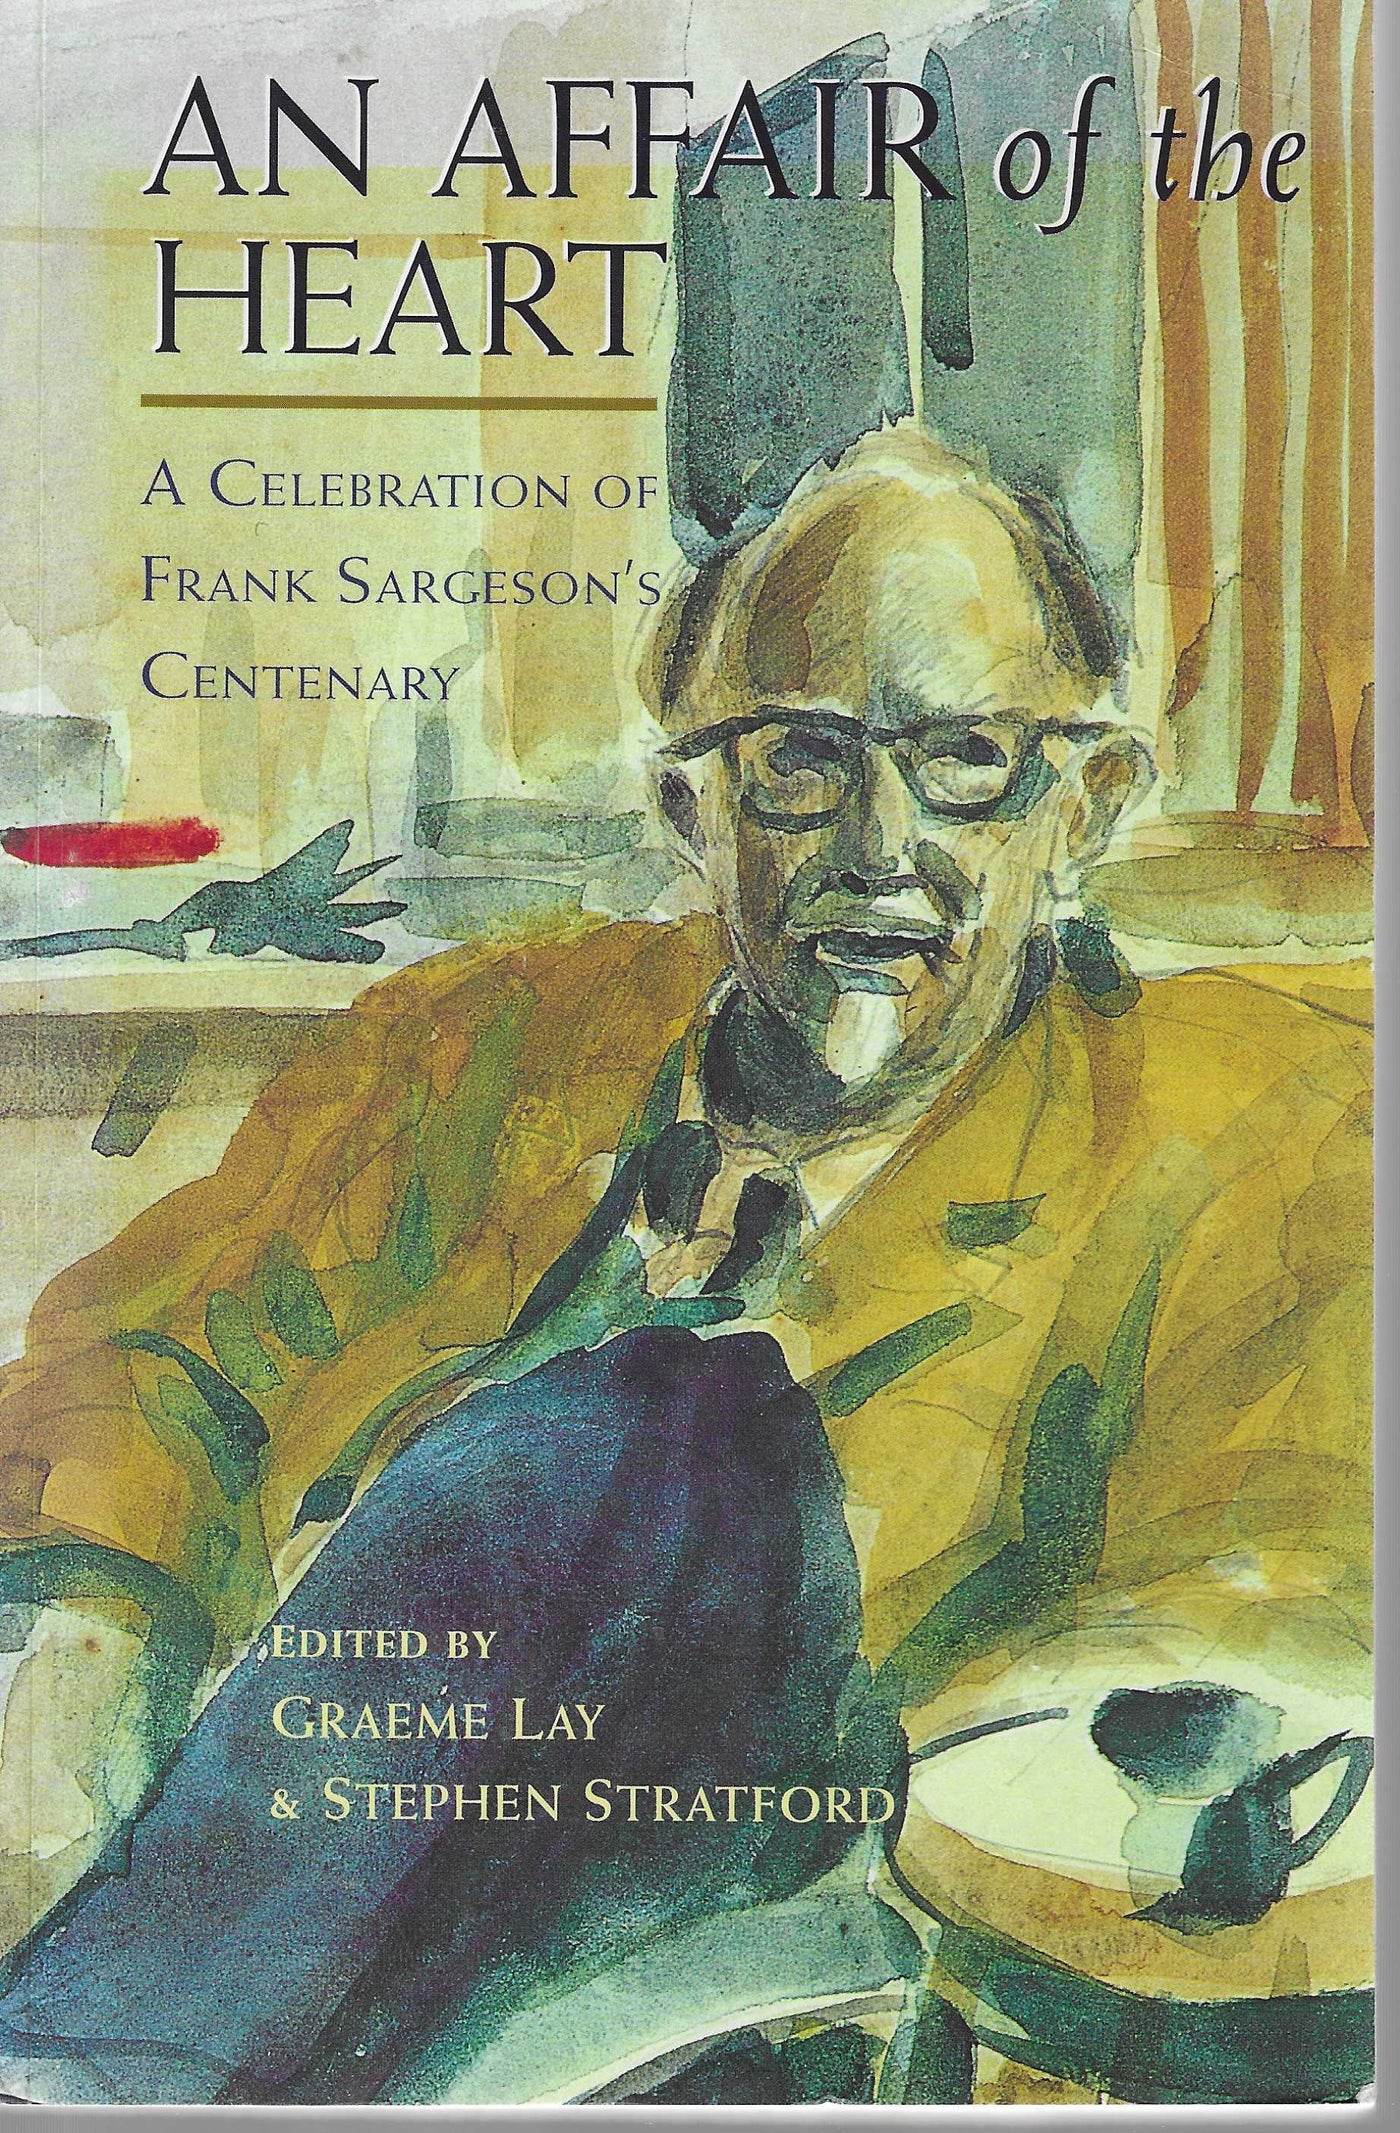 An Affair of the Heart: a Celebration of Frank Sargeson's Centenary